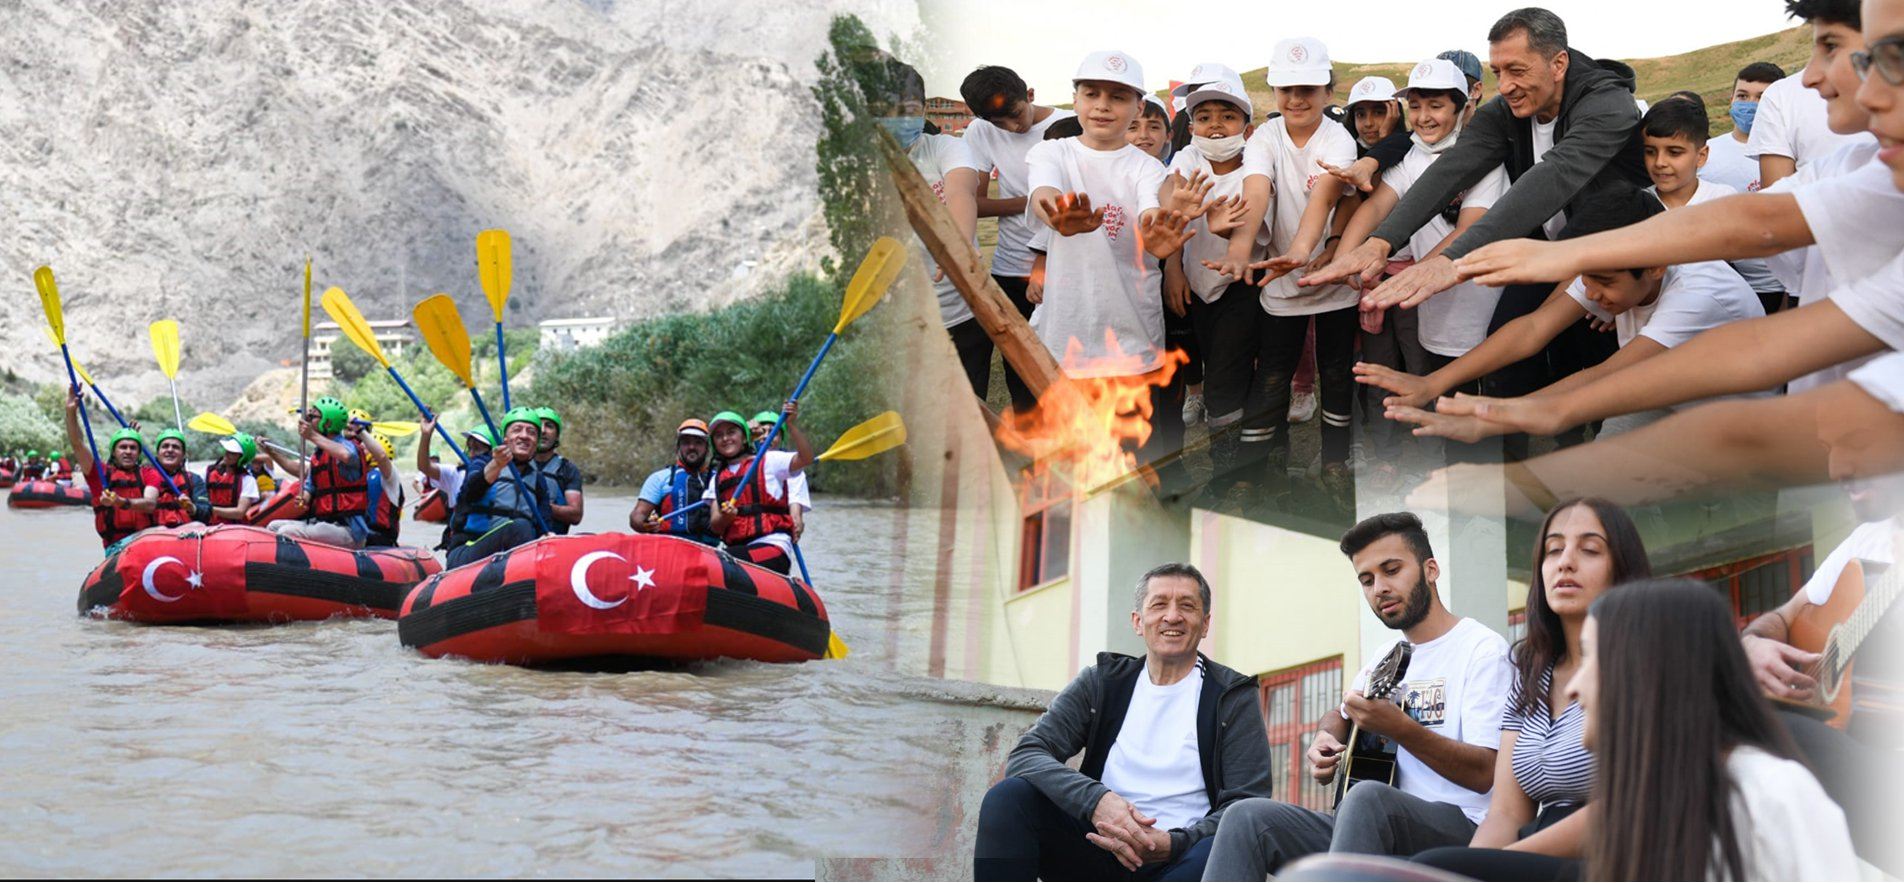 MINISTER SELÇUK SHARES THE EXCITEMENT OF STUDENTS WHO ARE RAFTING AND CAMPING AS A PART OF THE REMEDIAL TRAINING ACTVITIES IN HAKKÂRİ